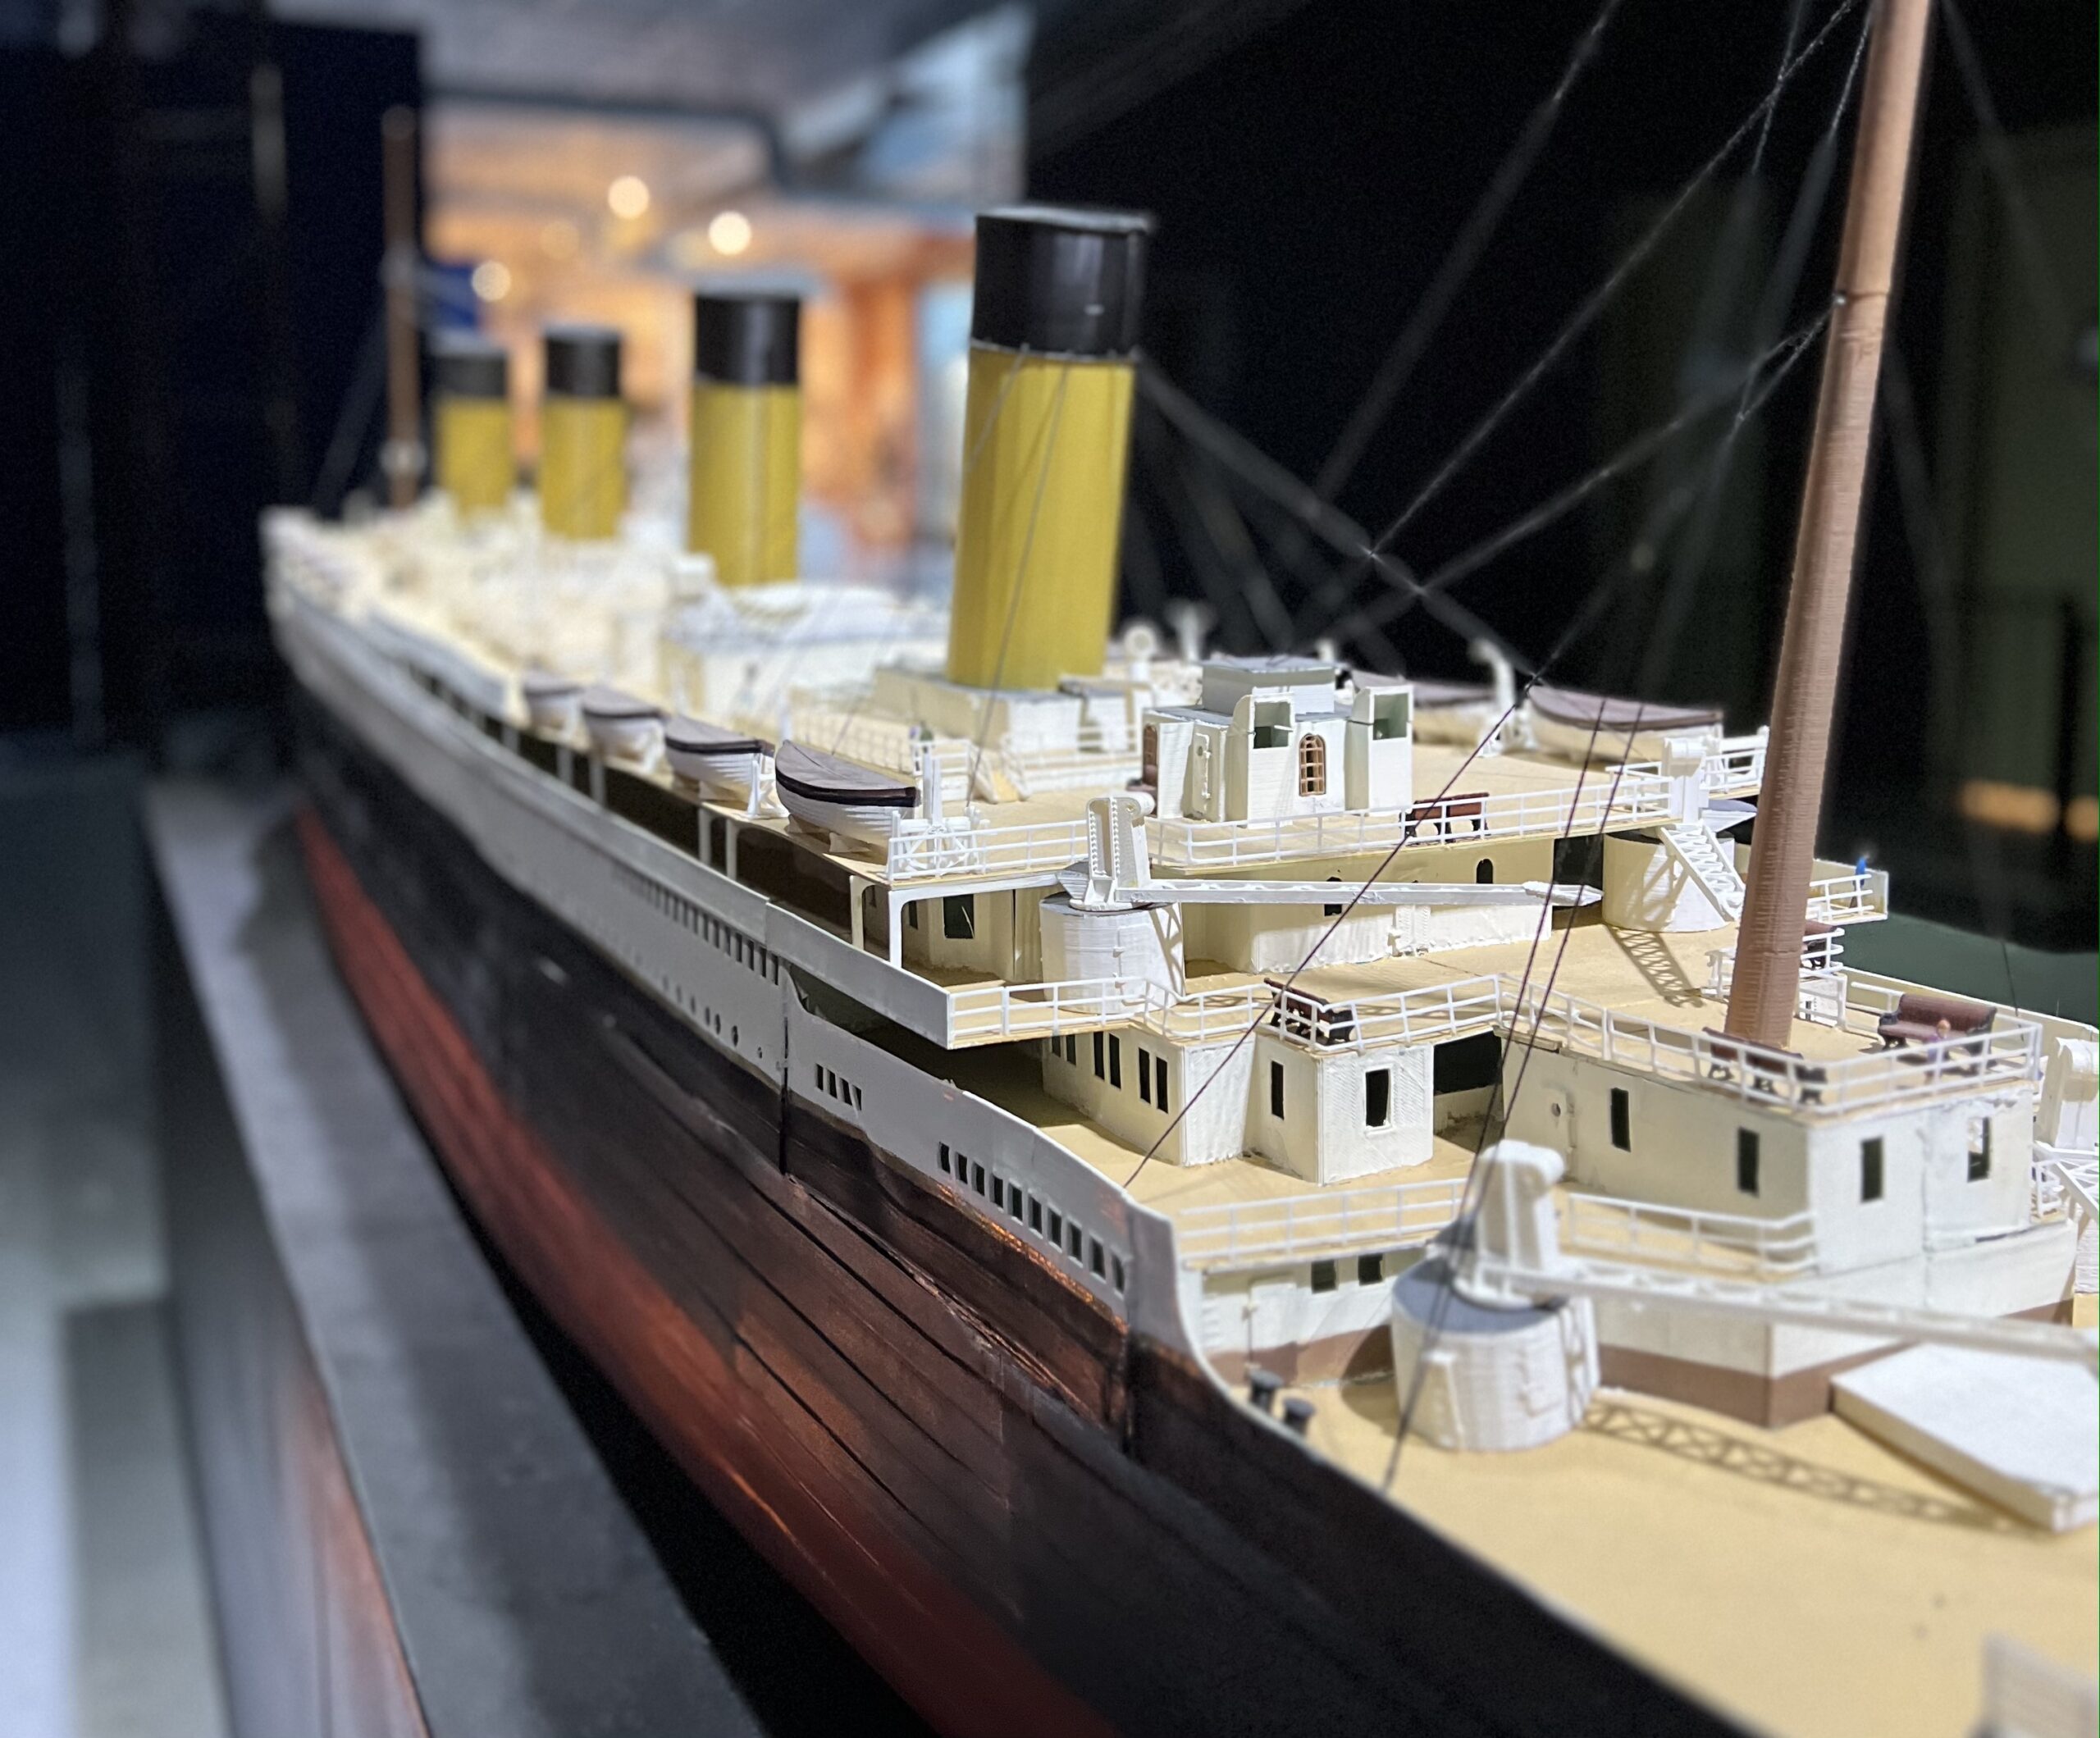 Take a look inside this immersive Titanic exhibition in Los Angeles – Daily  News